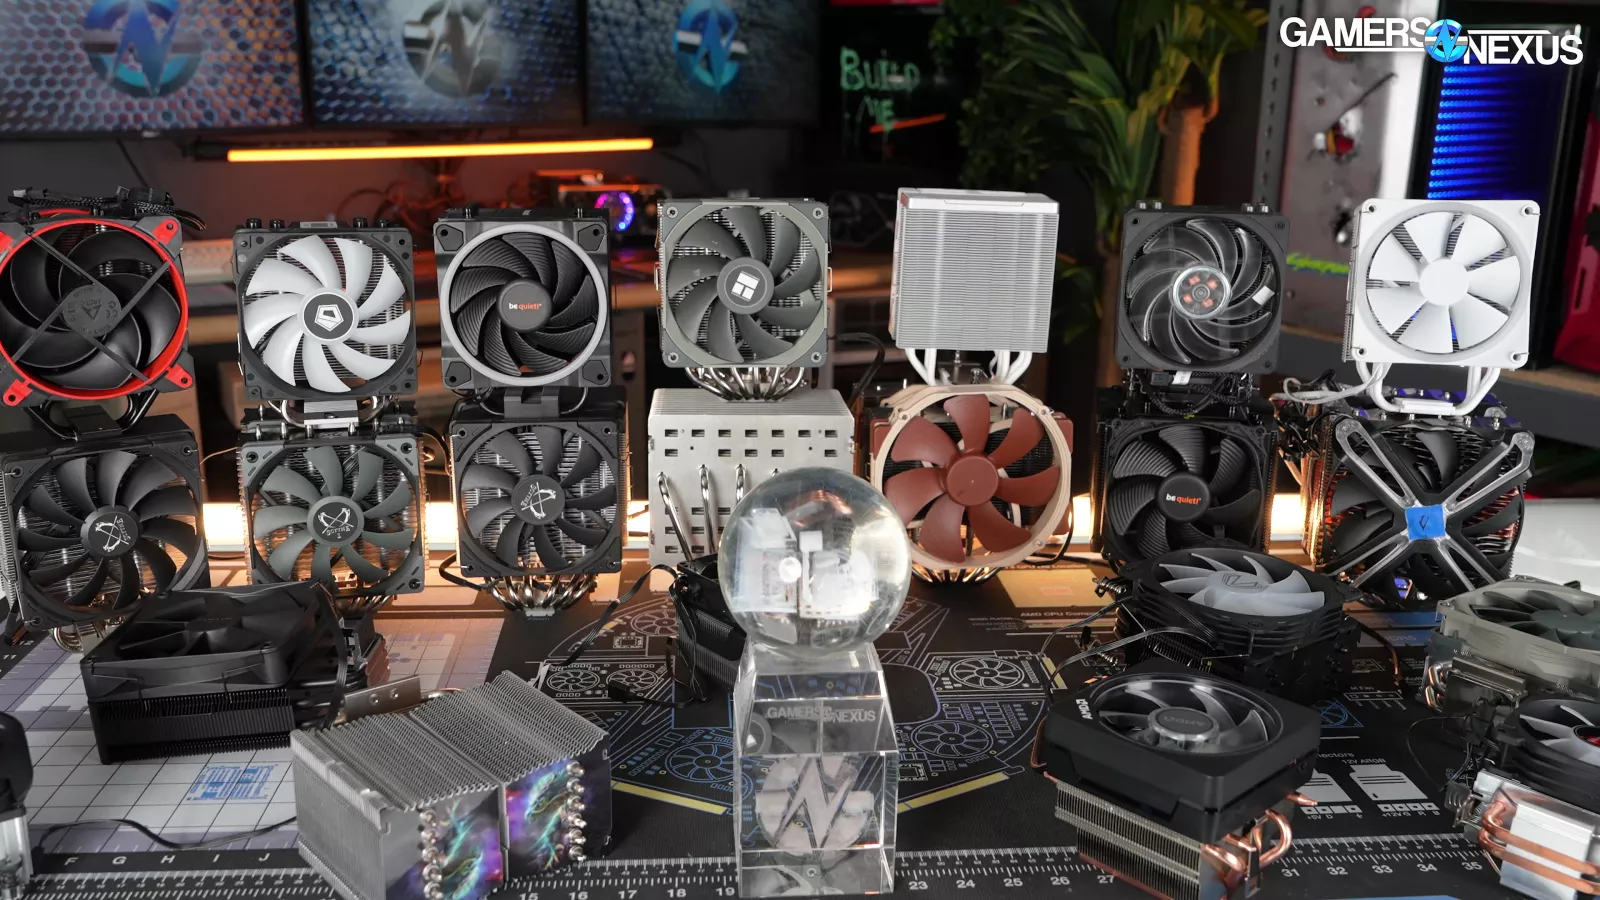 Valve Steam Deck Hardware Review & Analysis: Thermals, Noise, Power, &  Gaming Benchmarks 